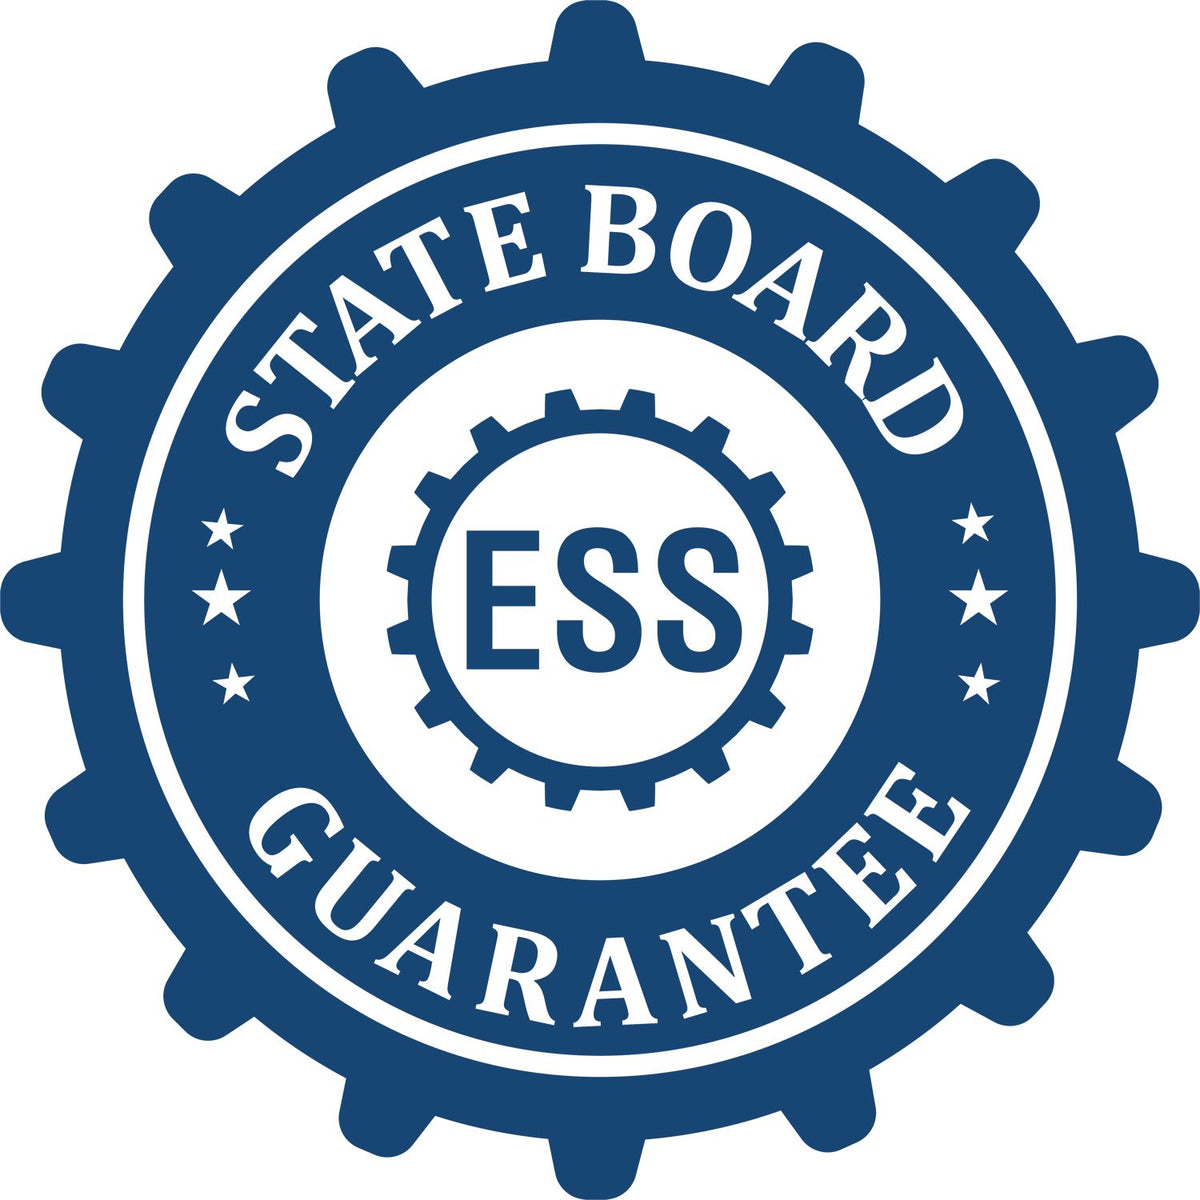 An emblem in a gear shape illustrating a state board guarantee for the Premium MaxLight Pre-Inked North Dakota Engineering Stamp product.